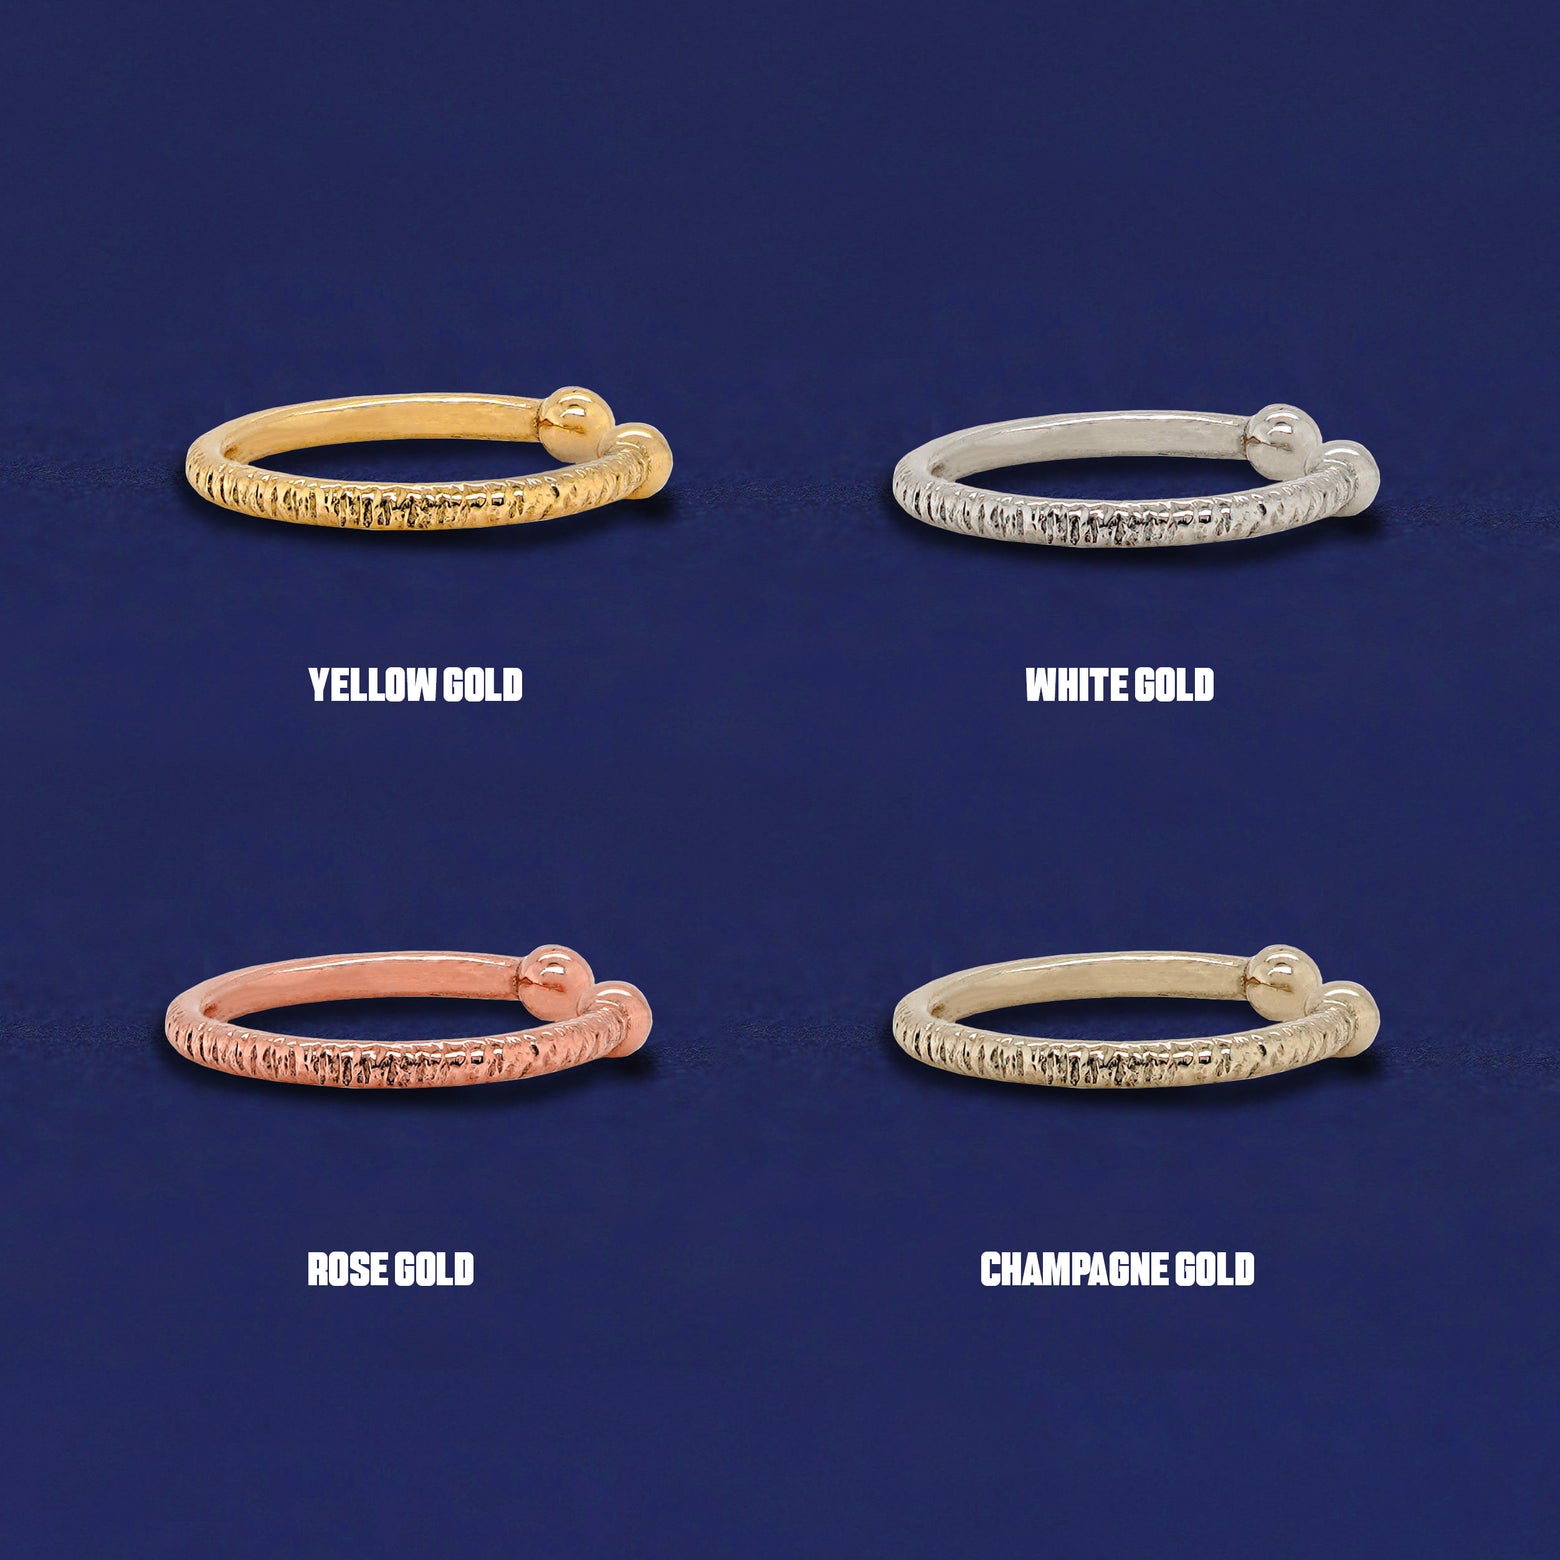 Four versions of the Shimmer Line Cuff shown in options of yellow, white, rose and champagne gold